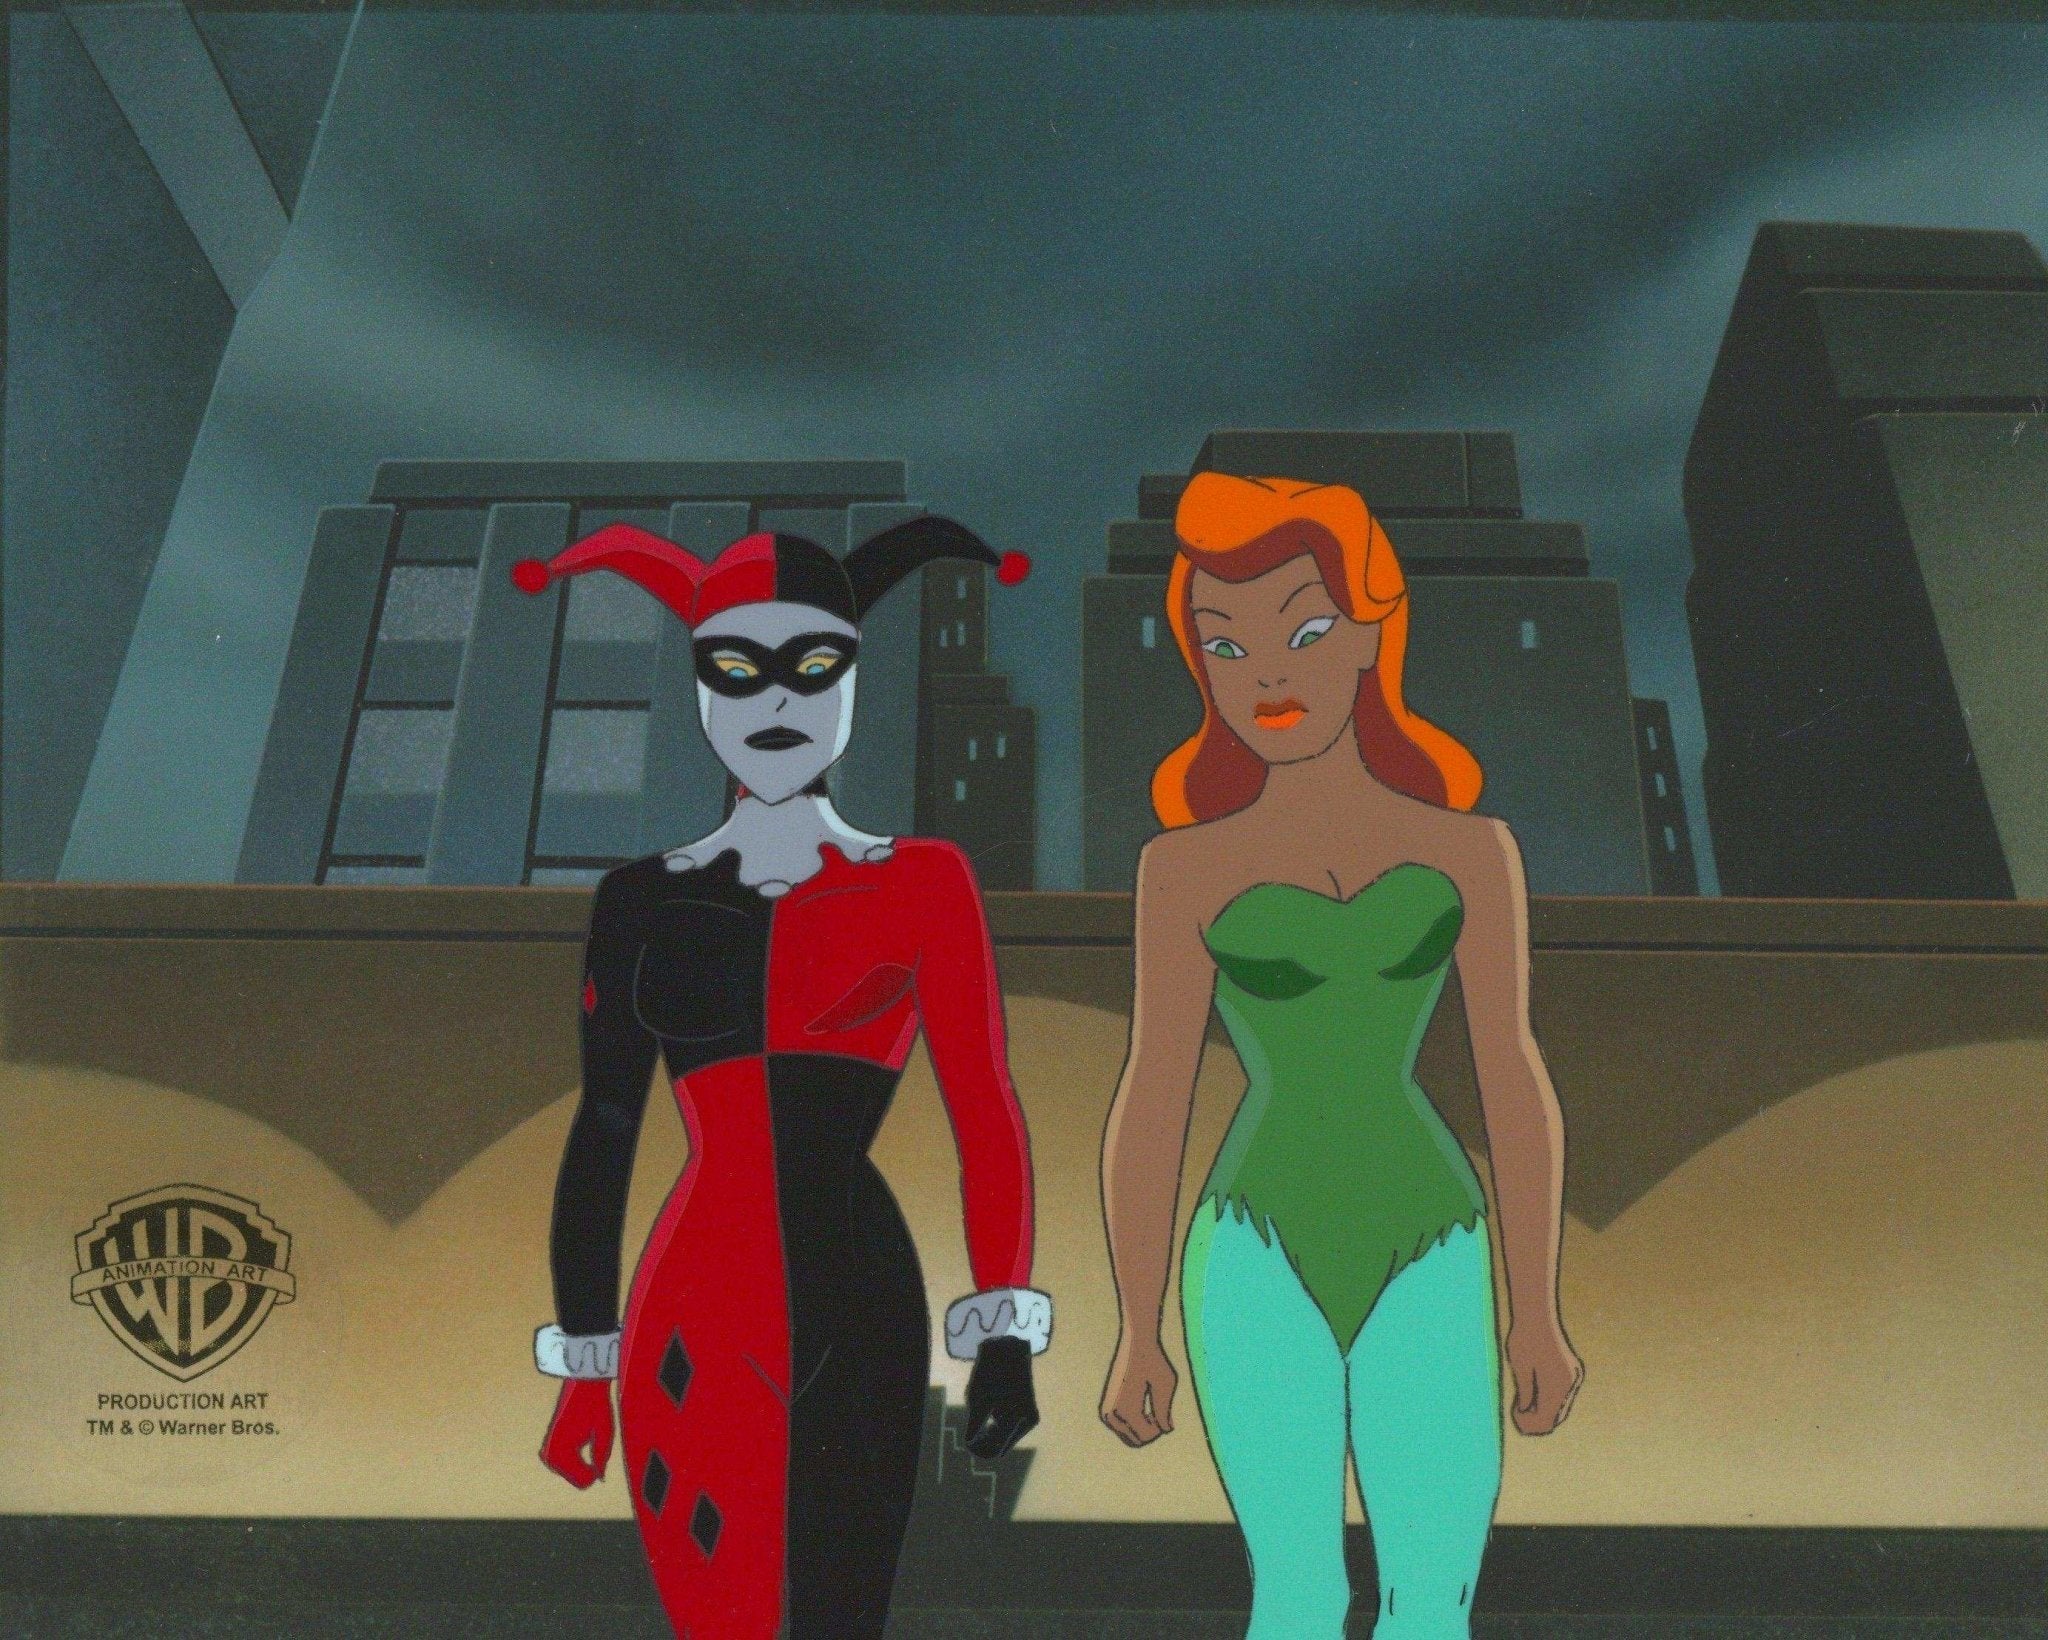 original poison ivy character